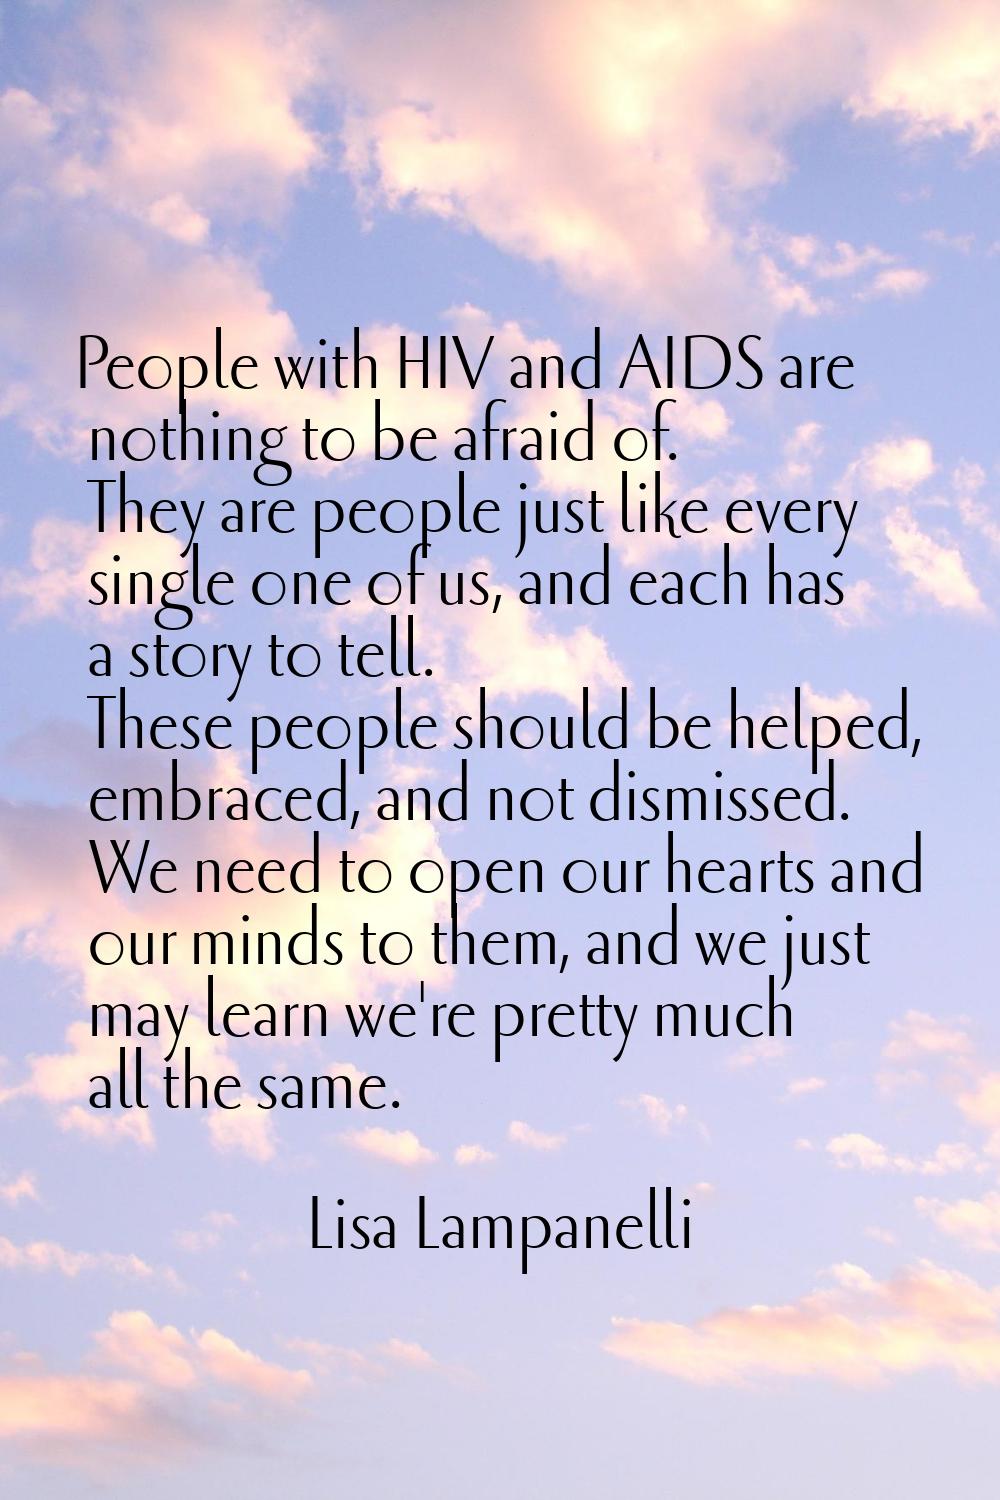 People with HIV and AIDS are nothing to be afraid of. They are people just like every single one of